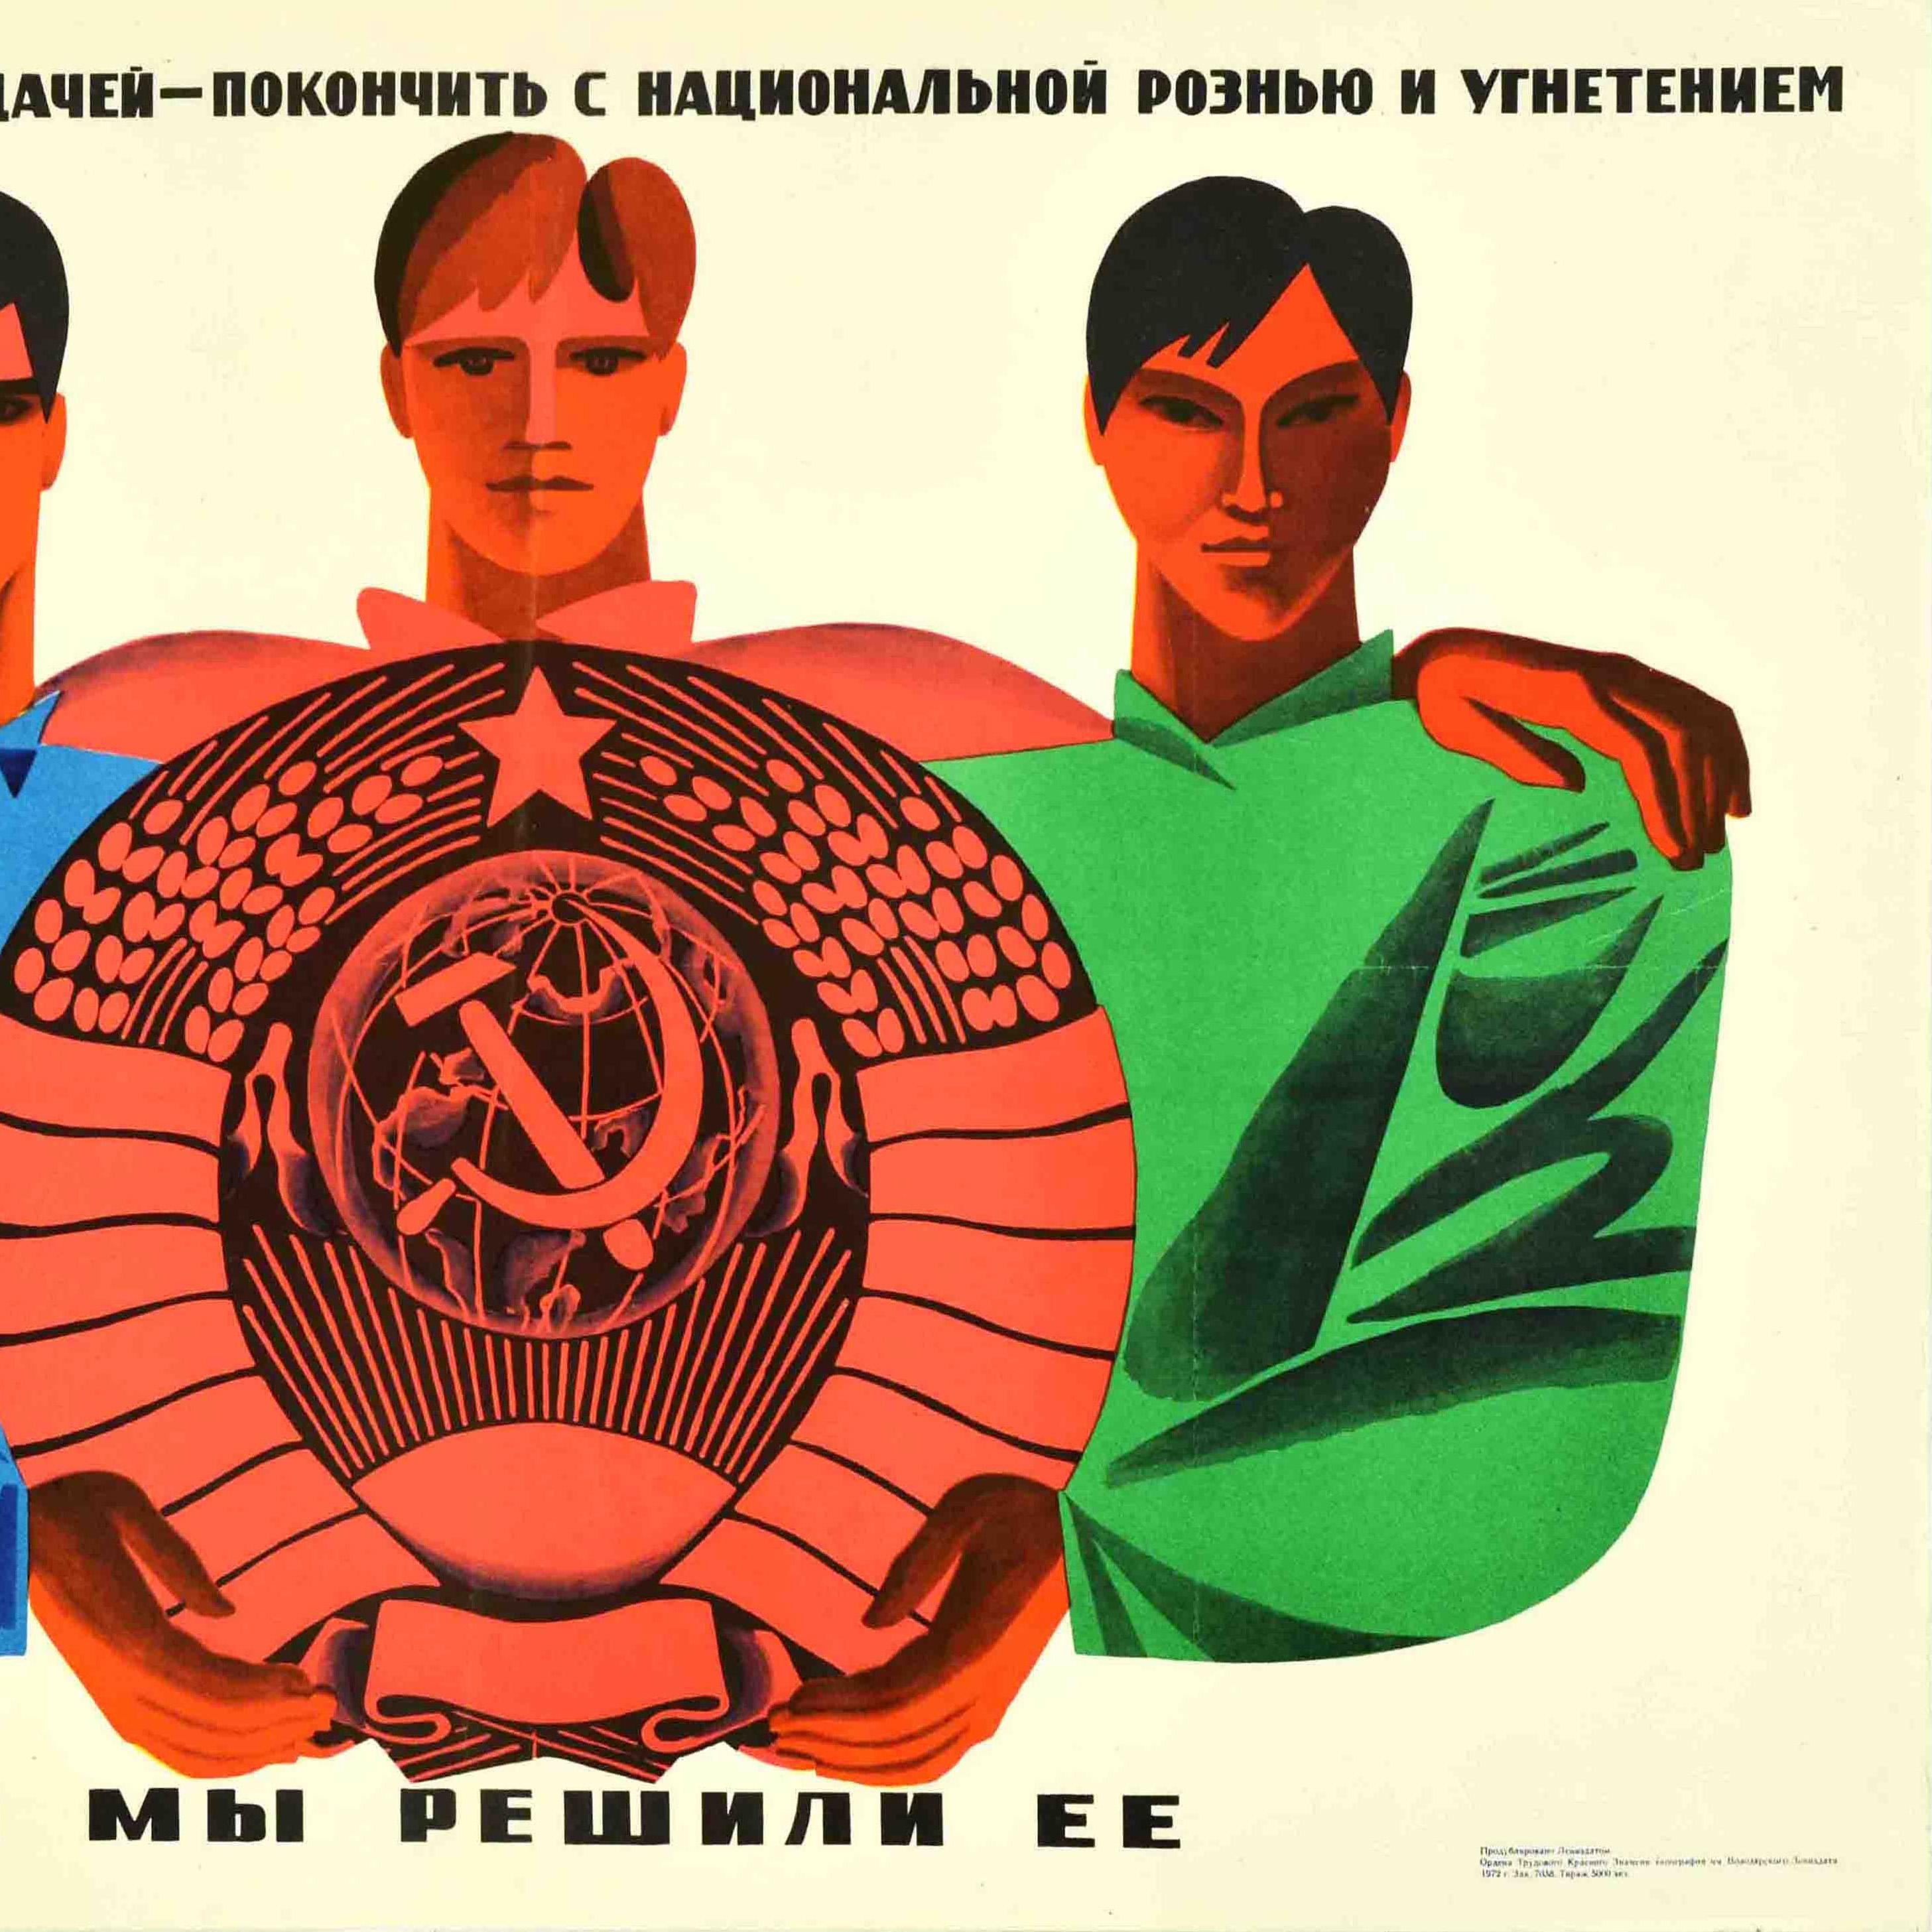 Original Vintage Soviet Propaganda Poster Ethnic Strife Oppression USSR Racism In Good Condition For Sale In London, GB